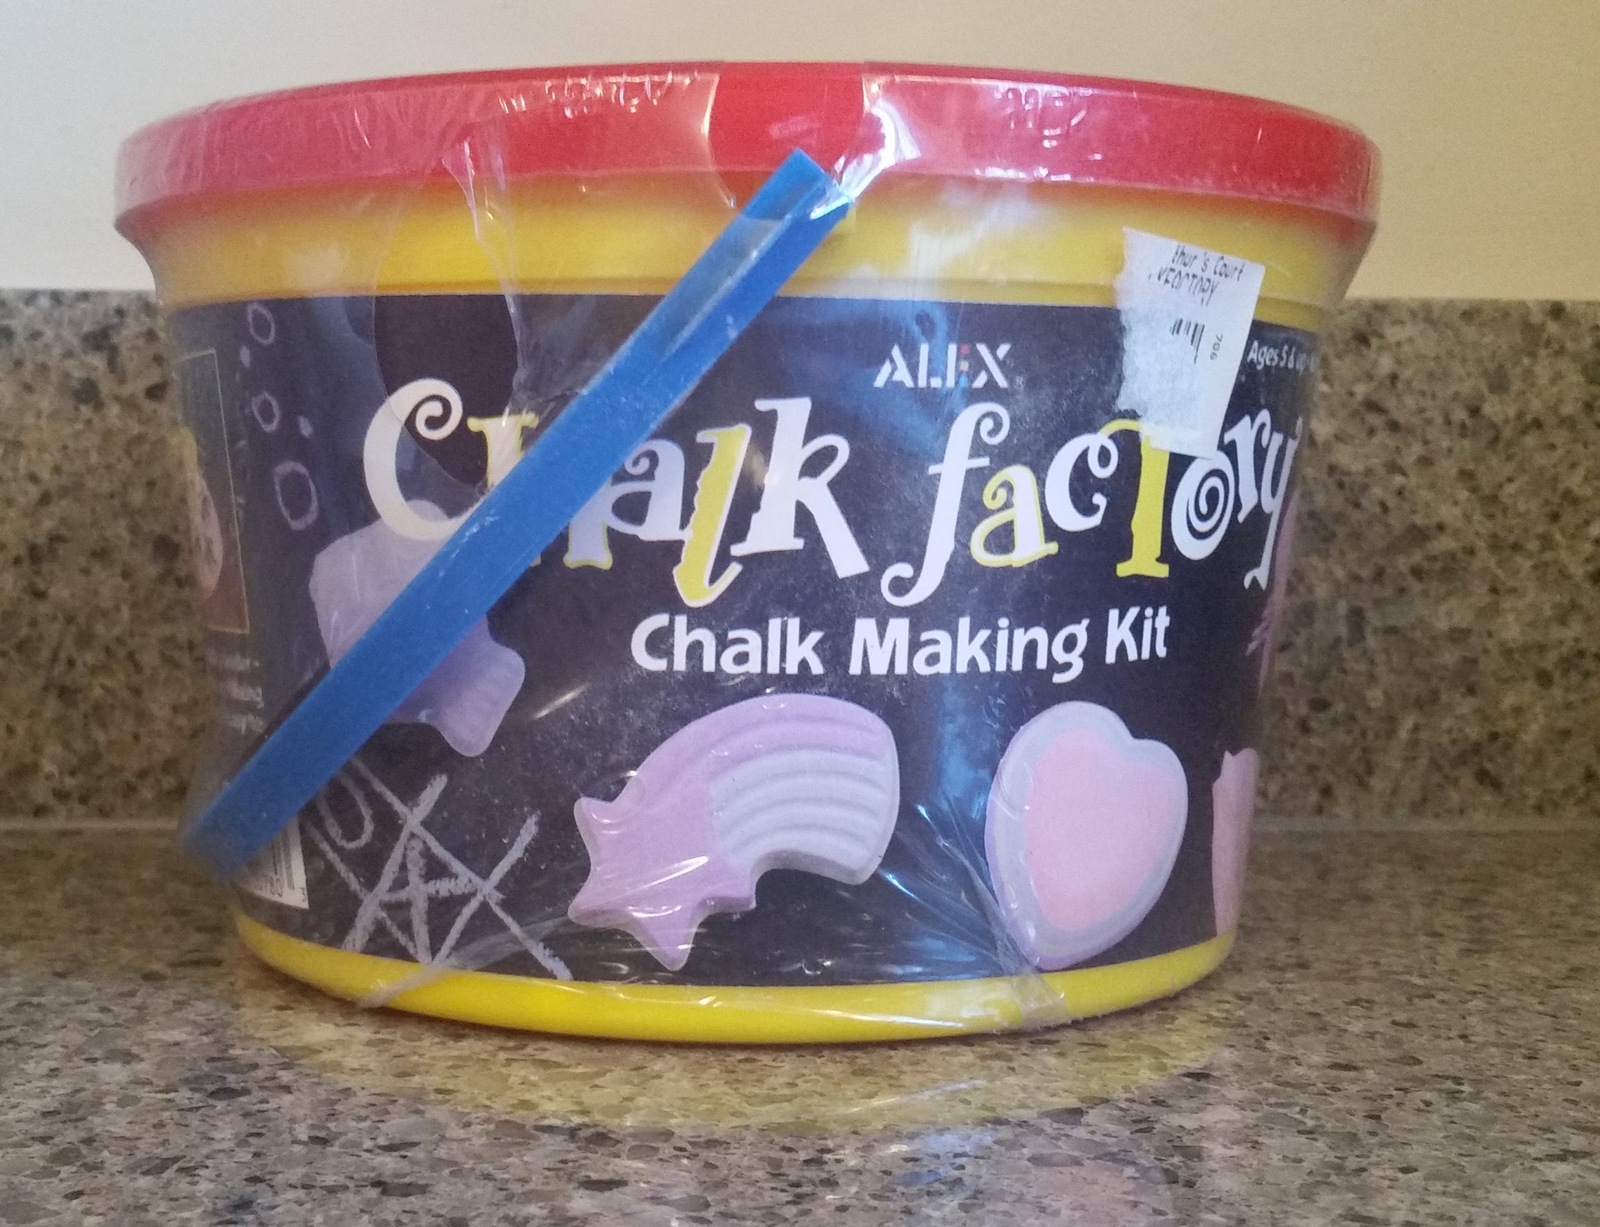 Alex chalk Factory Chalk making kit Art Supplies New Craft 8 molds 4 colors easy - $5.99